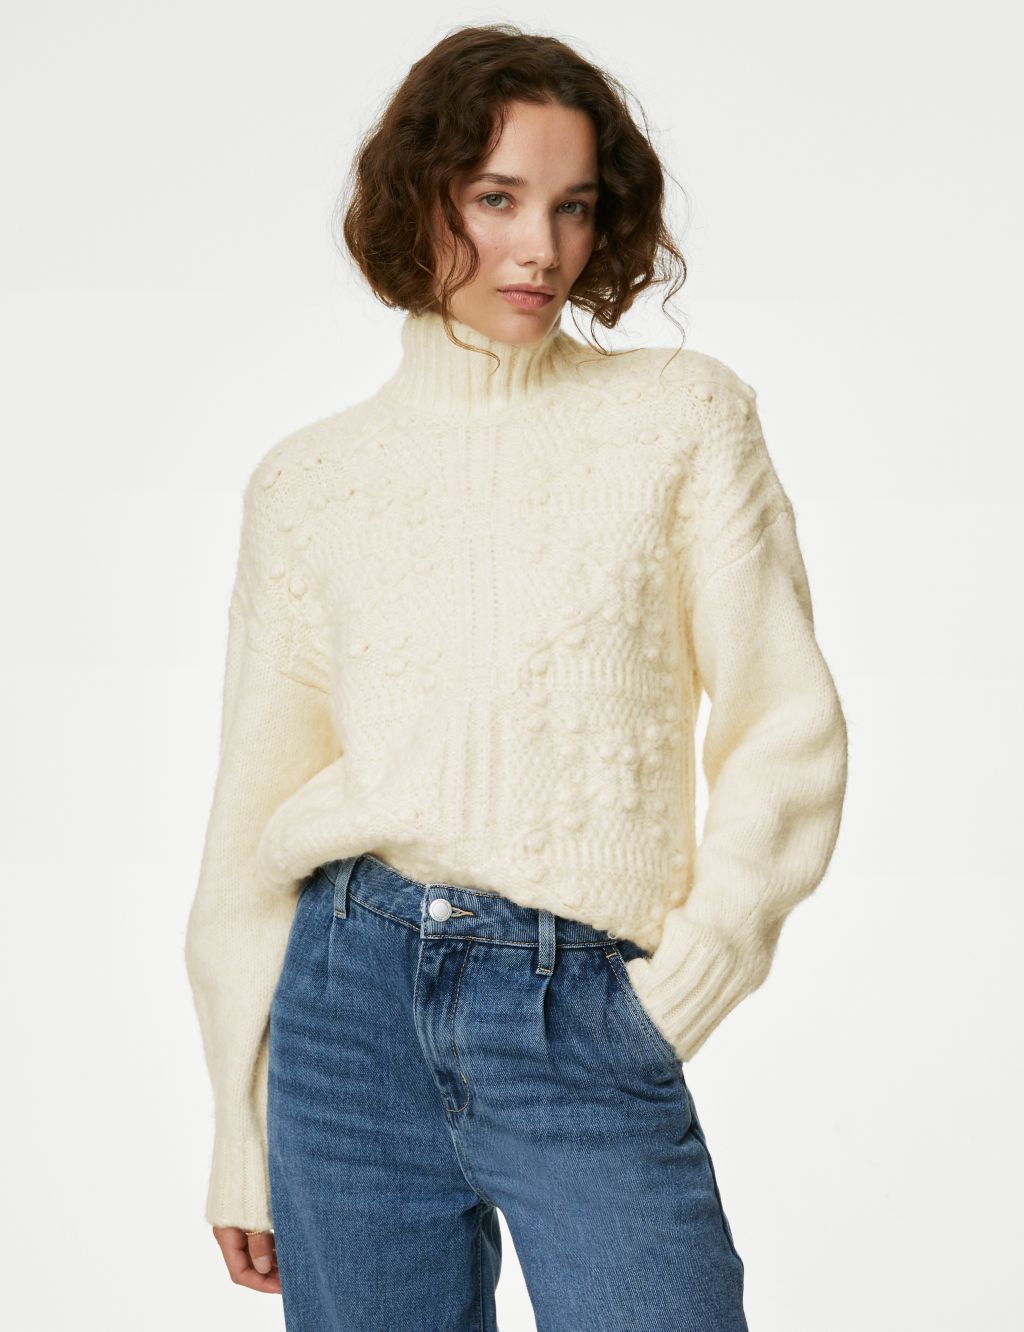 Cable Knit Longline Jumper with Wool image 1